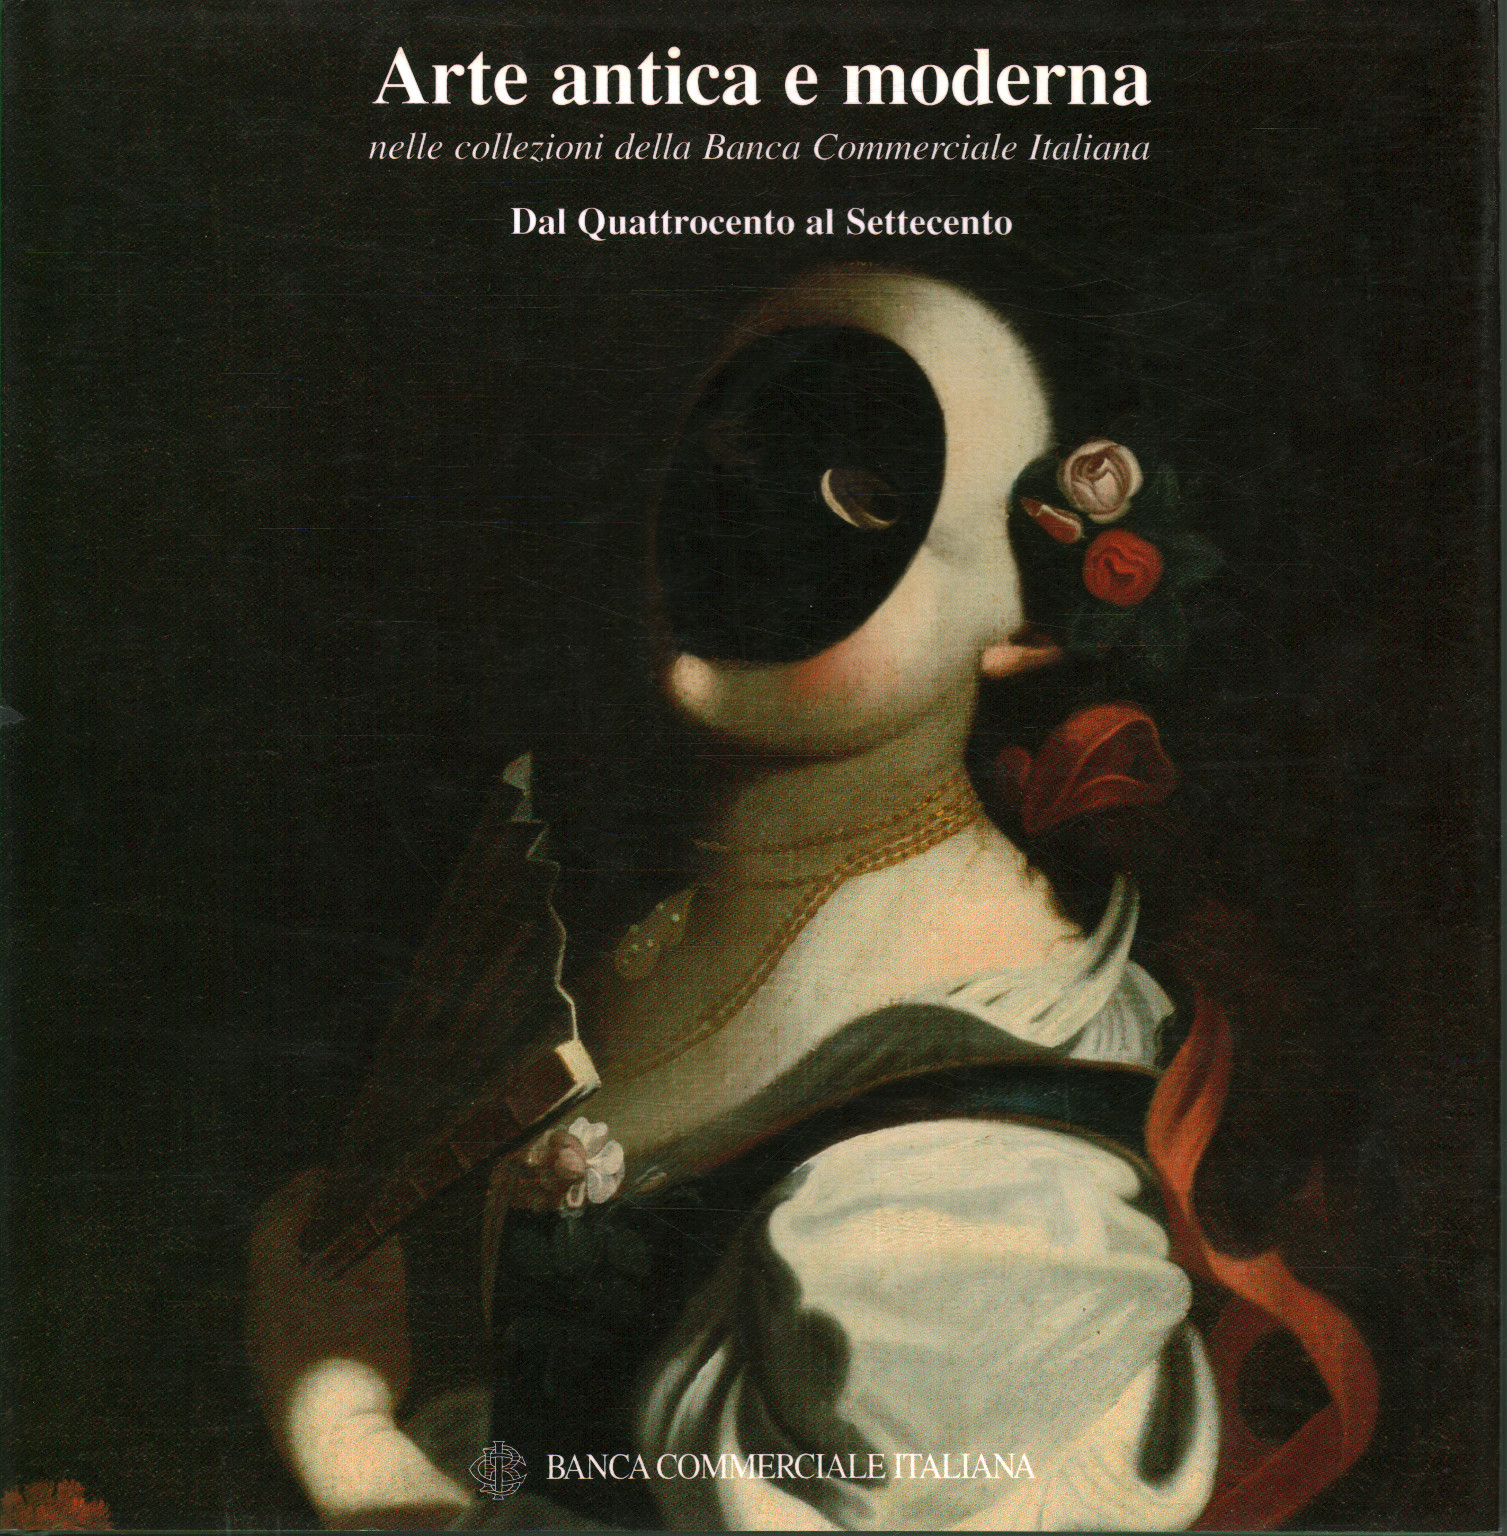 Ancient and modern art in the Bank's collections, Mercedes Precerutti Garberi